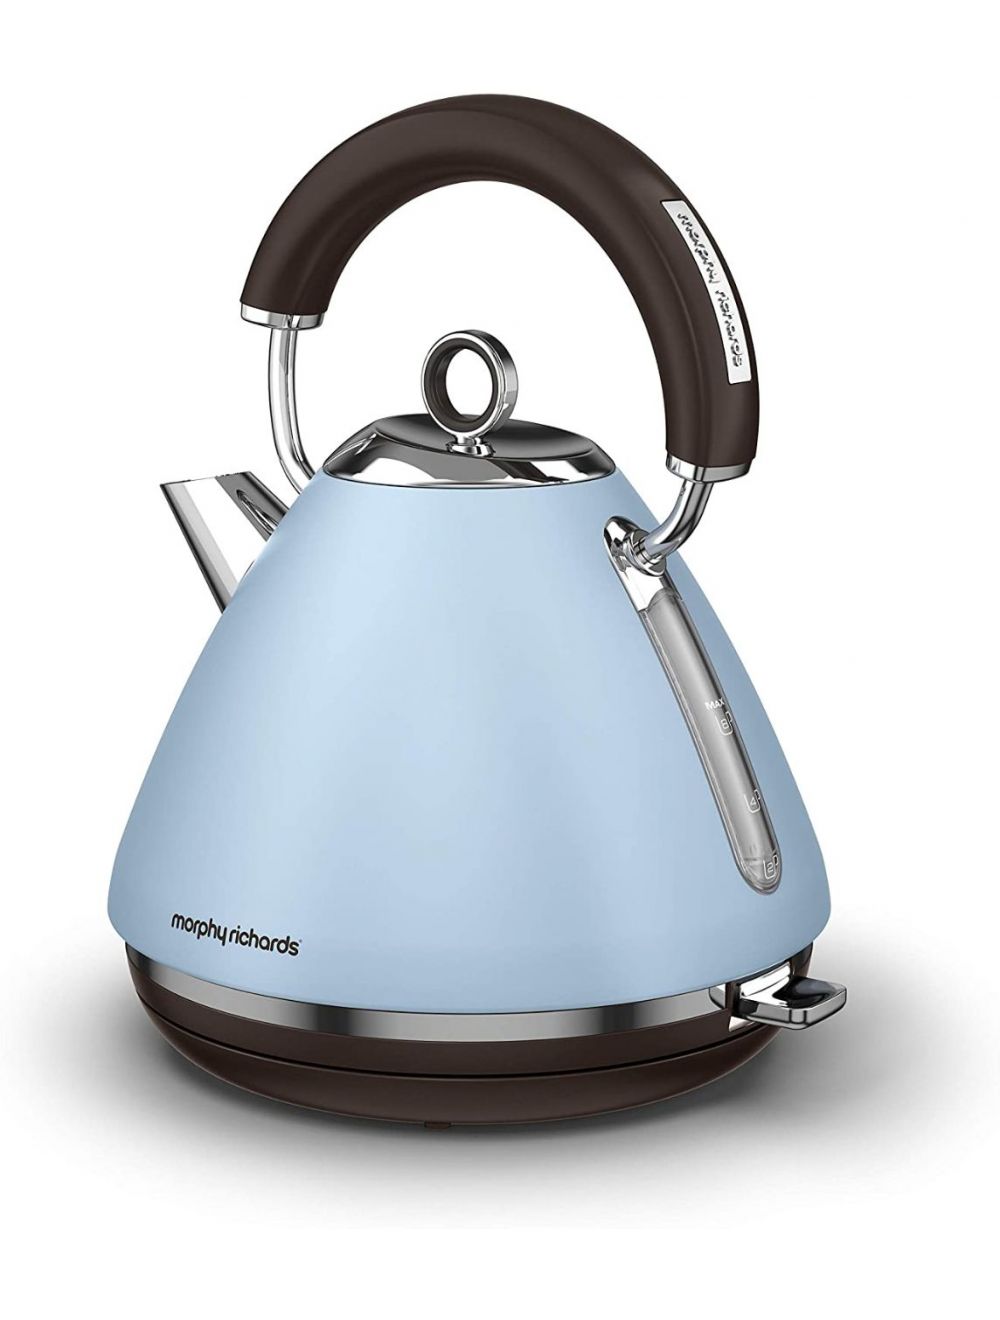 Morphy Richards Accents Pyramid Kettle - Azure-102100